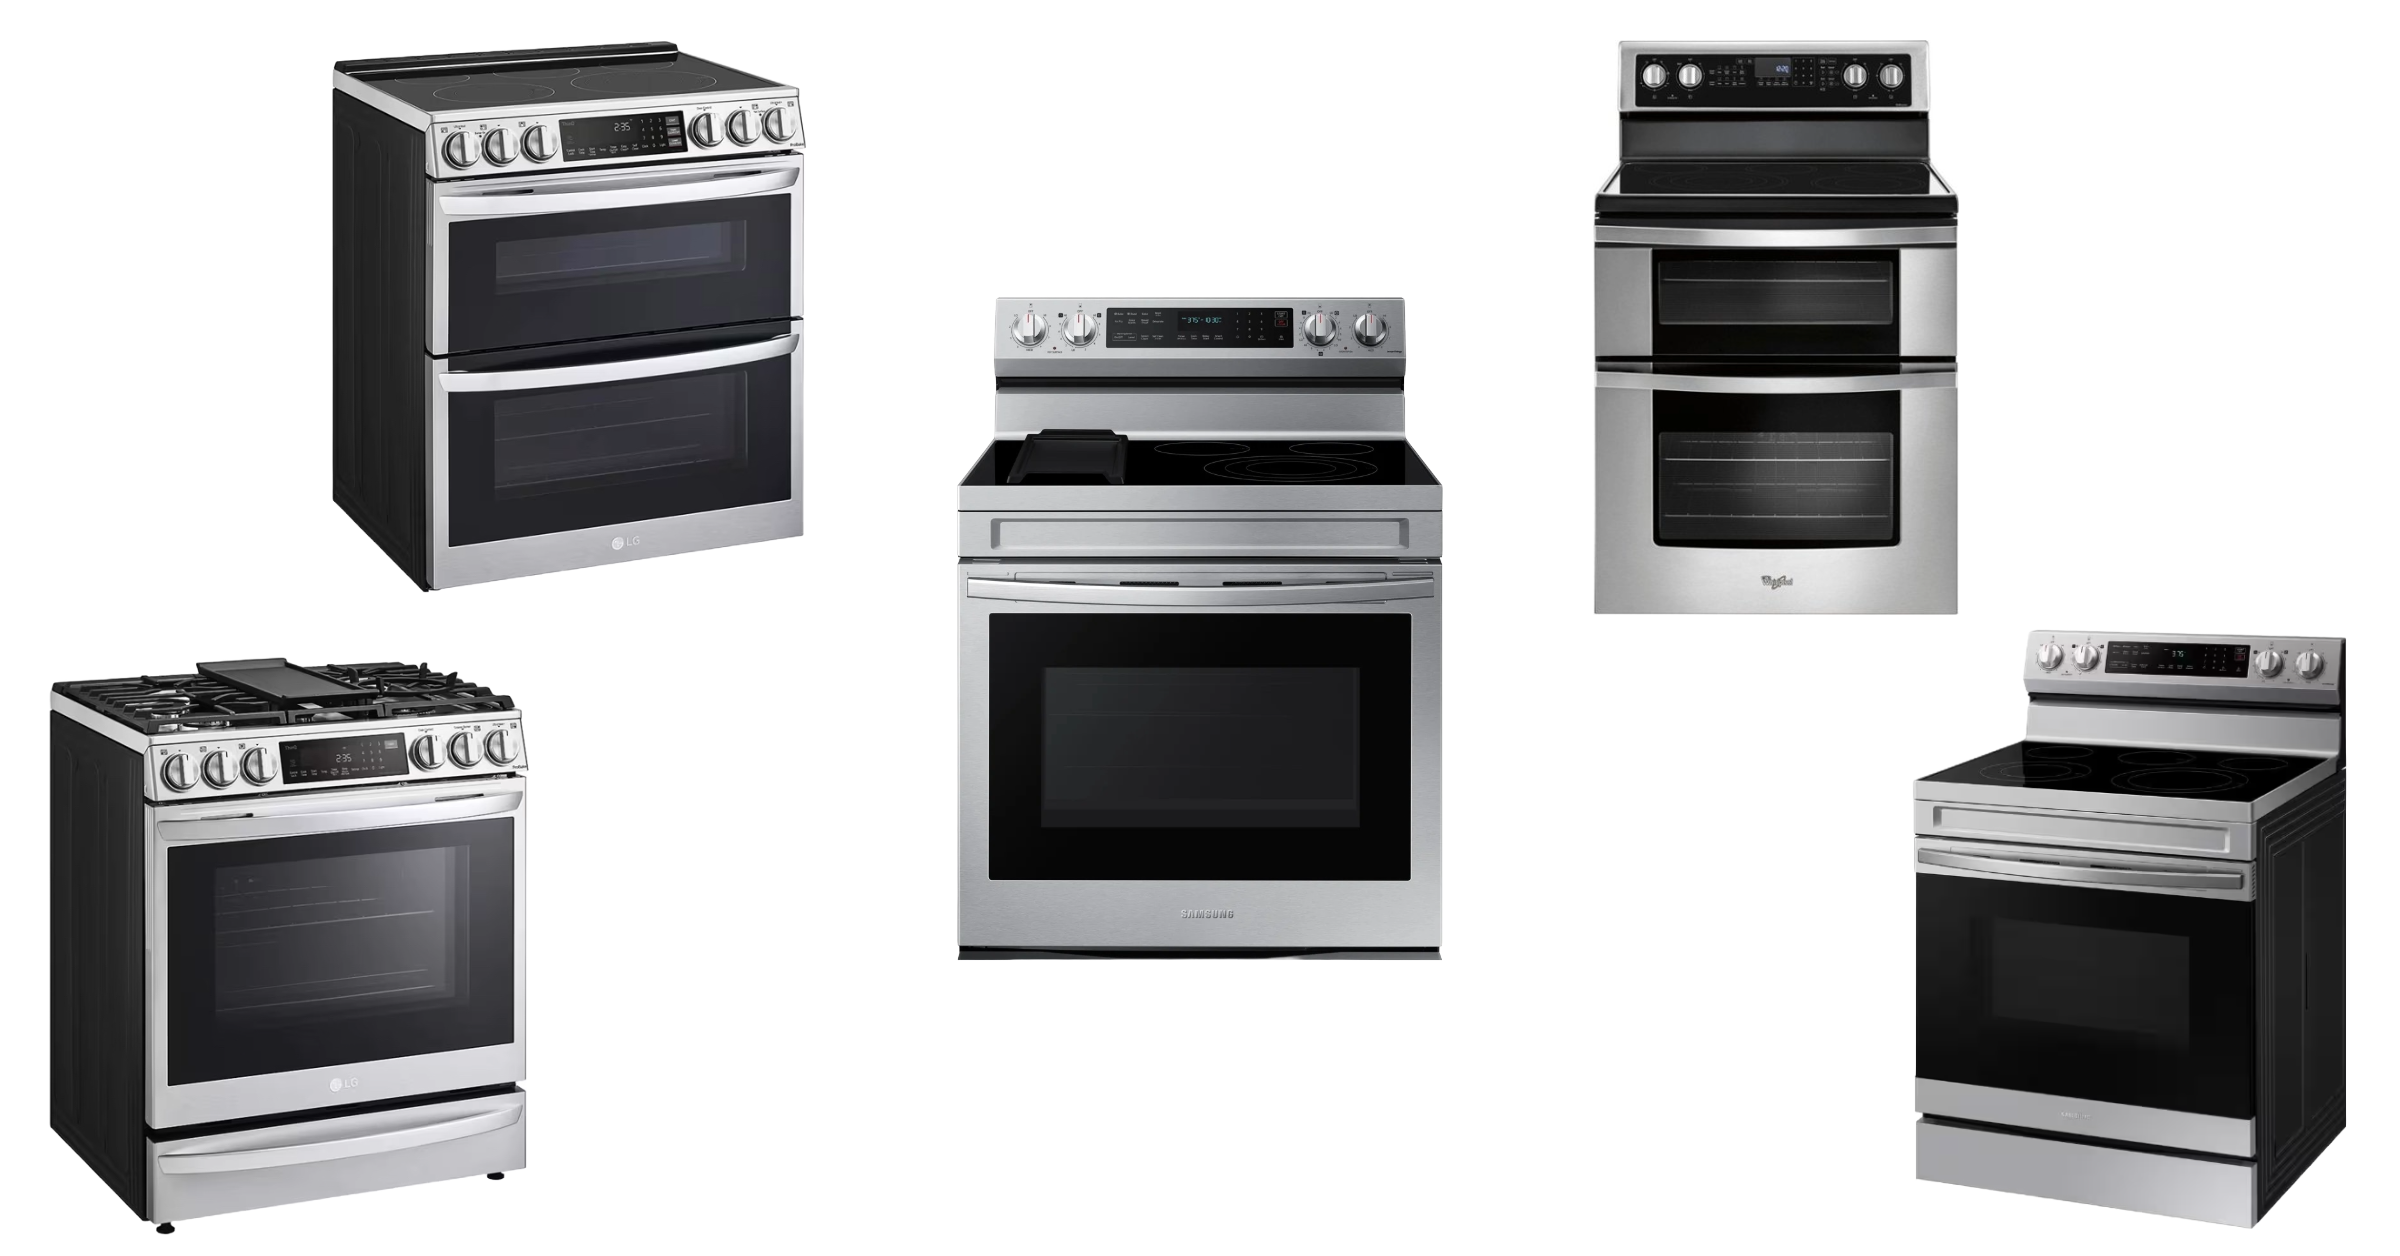 Best deals on electric ranges from top brands this Presidents' Day 